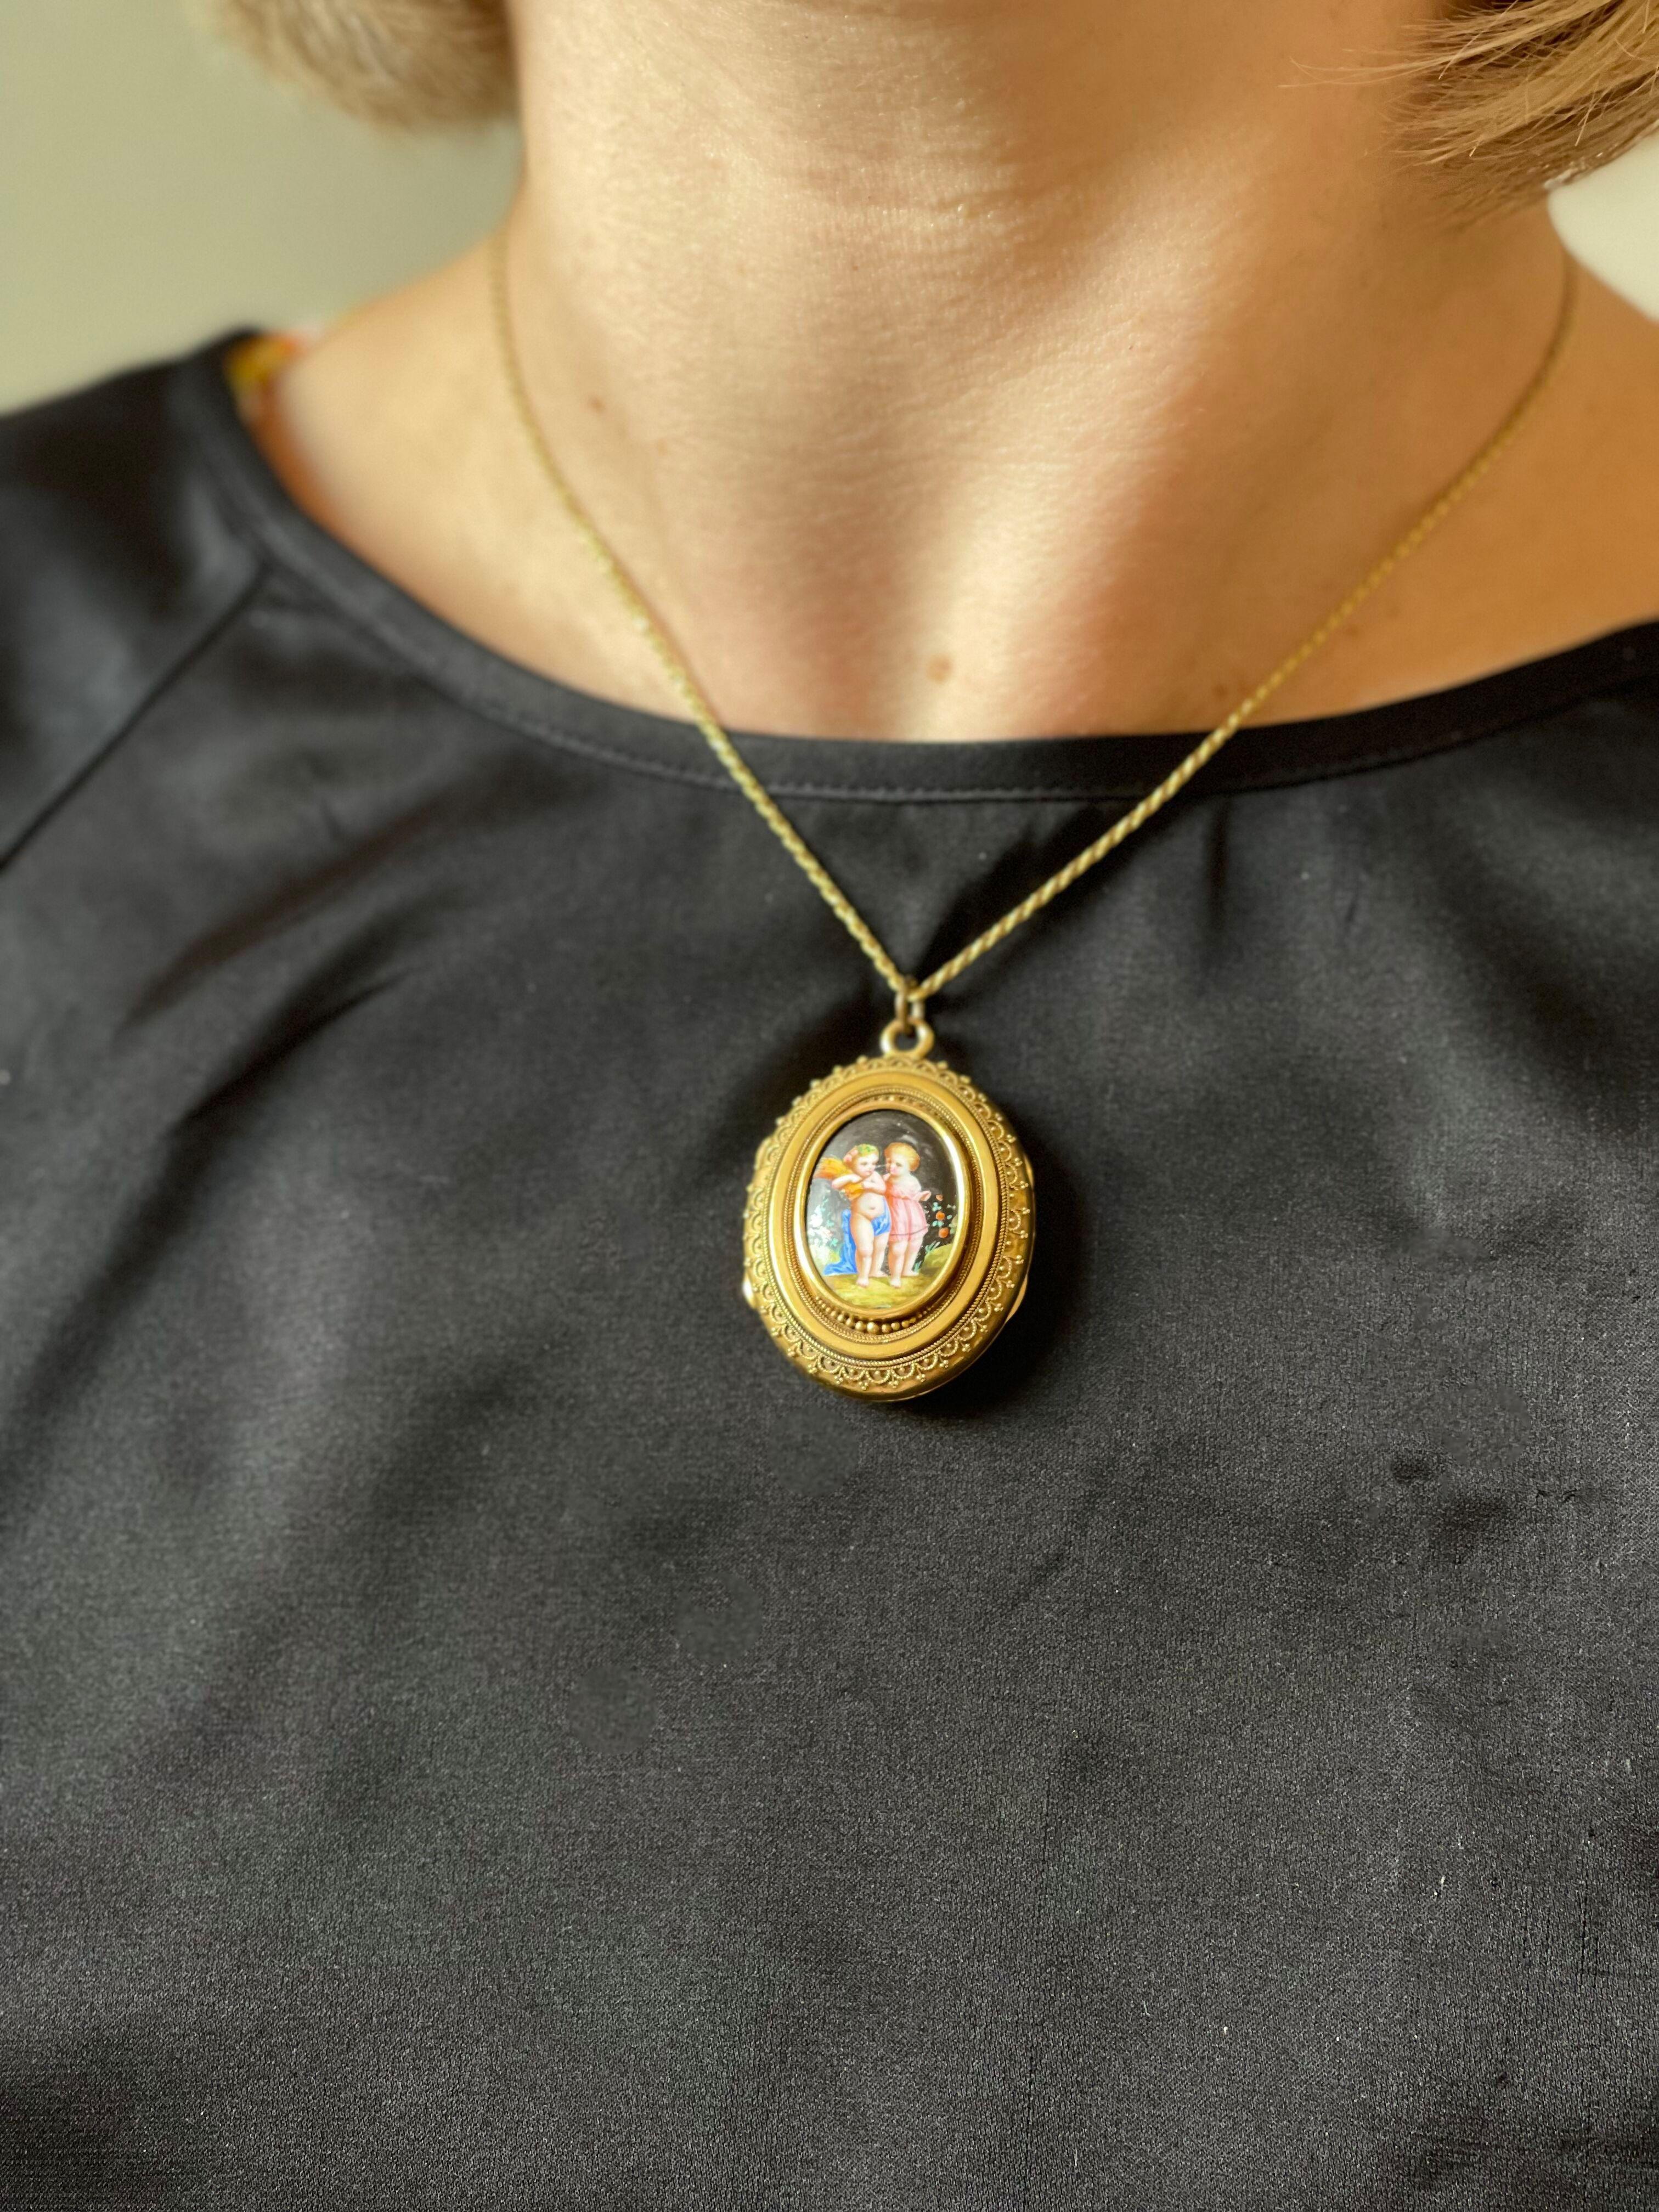 Antique Victorian 14k gold pendant locket, decorated with hand painted miniature painting, depicting two cherubs. The locket has the original antique photograph of a gentleman inside. Measures 1 5/8